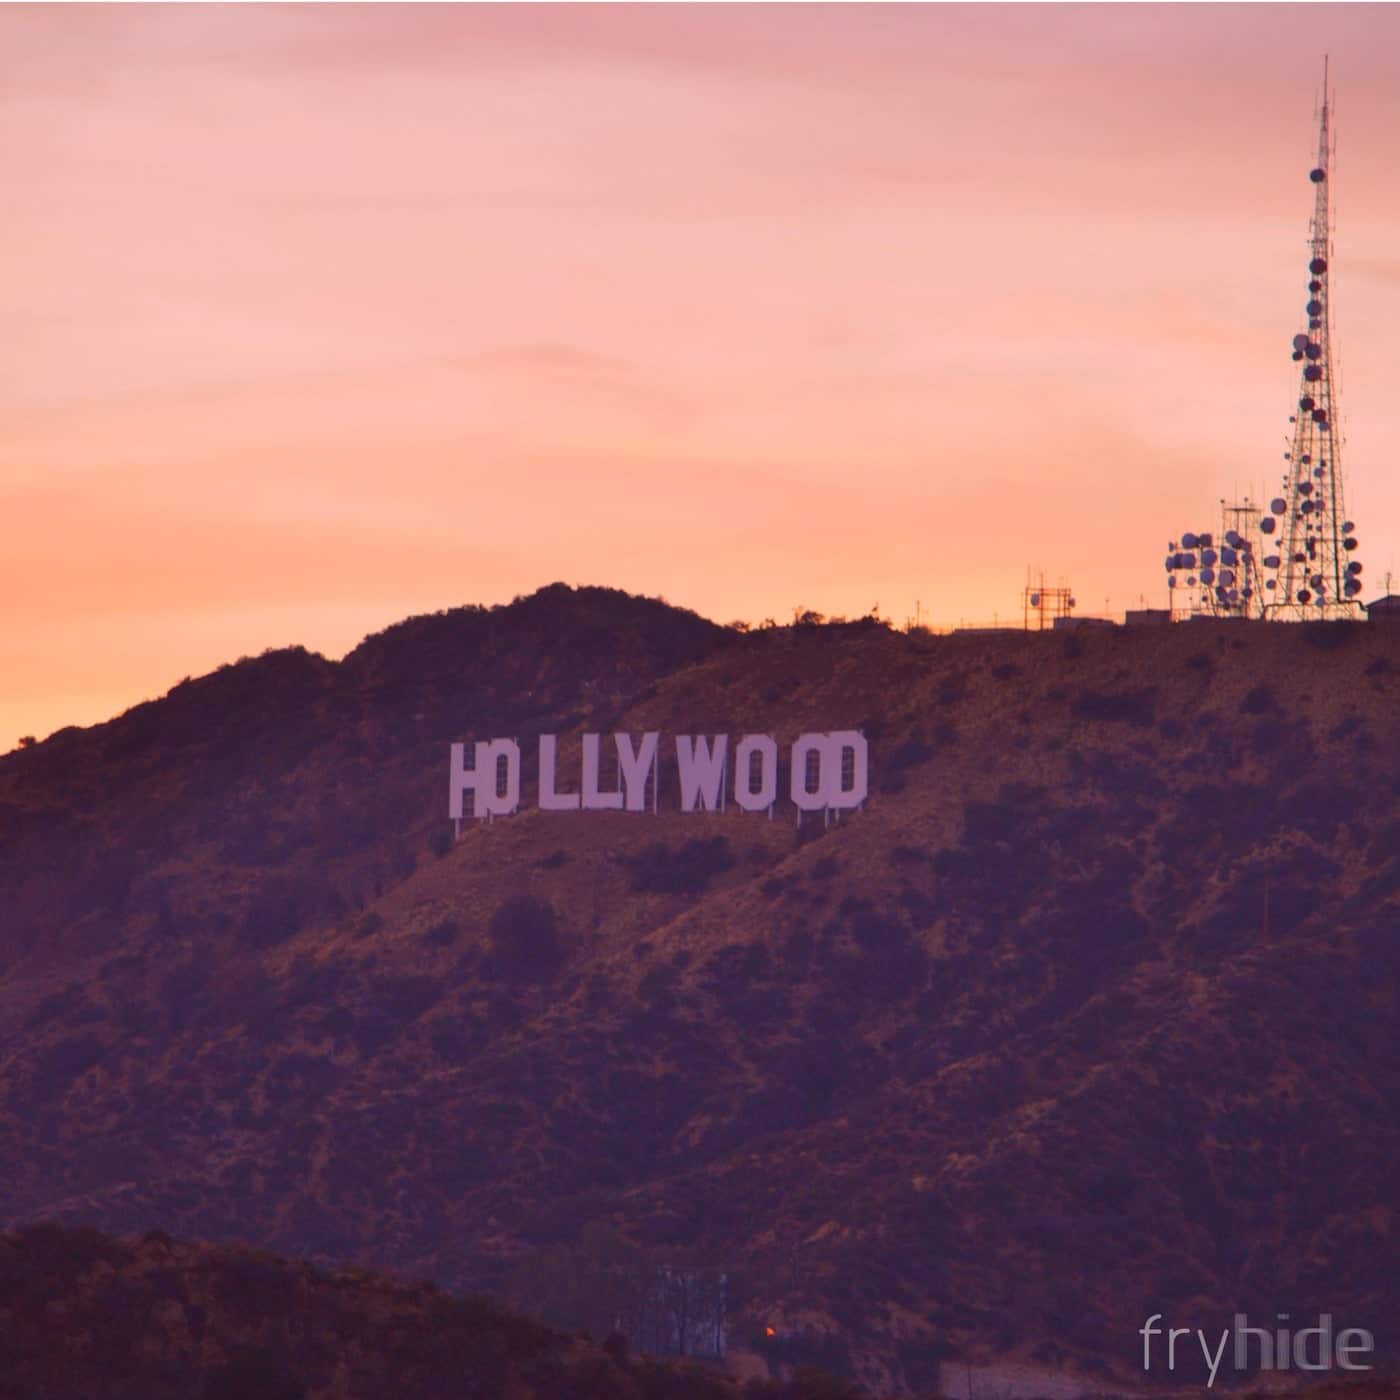 Download ariaano, Colle - Hollywood